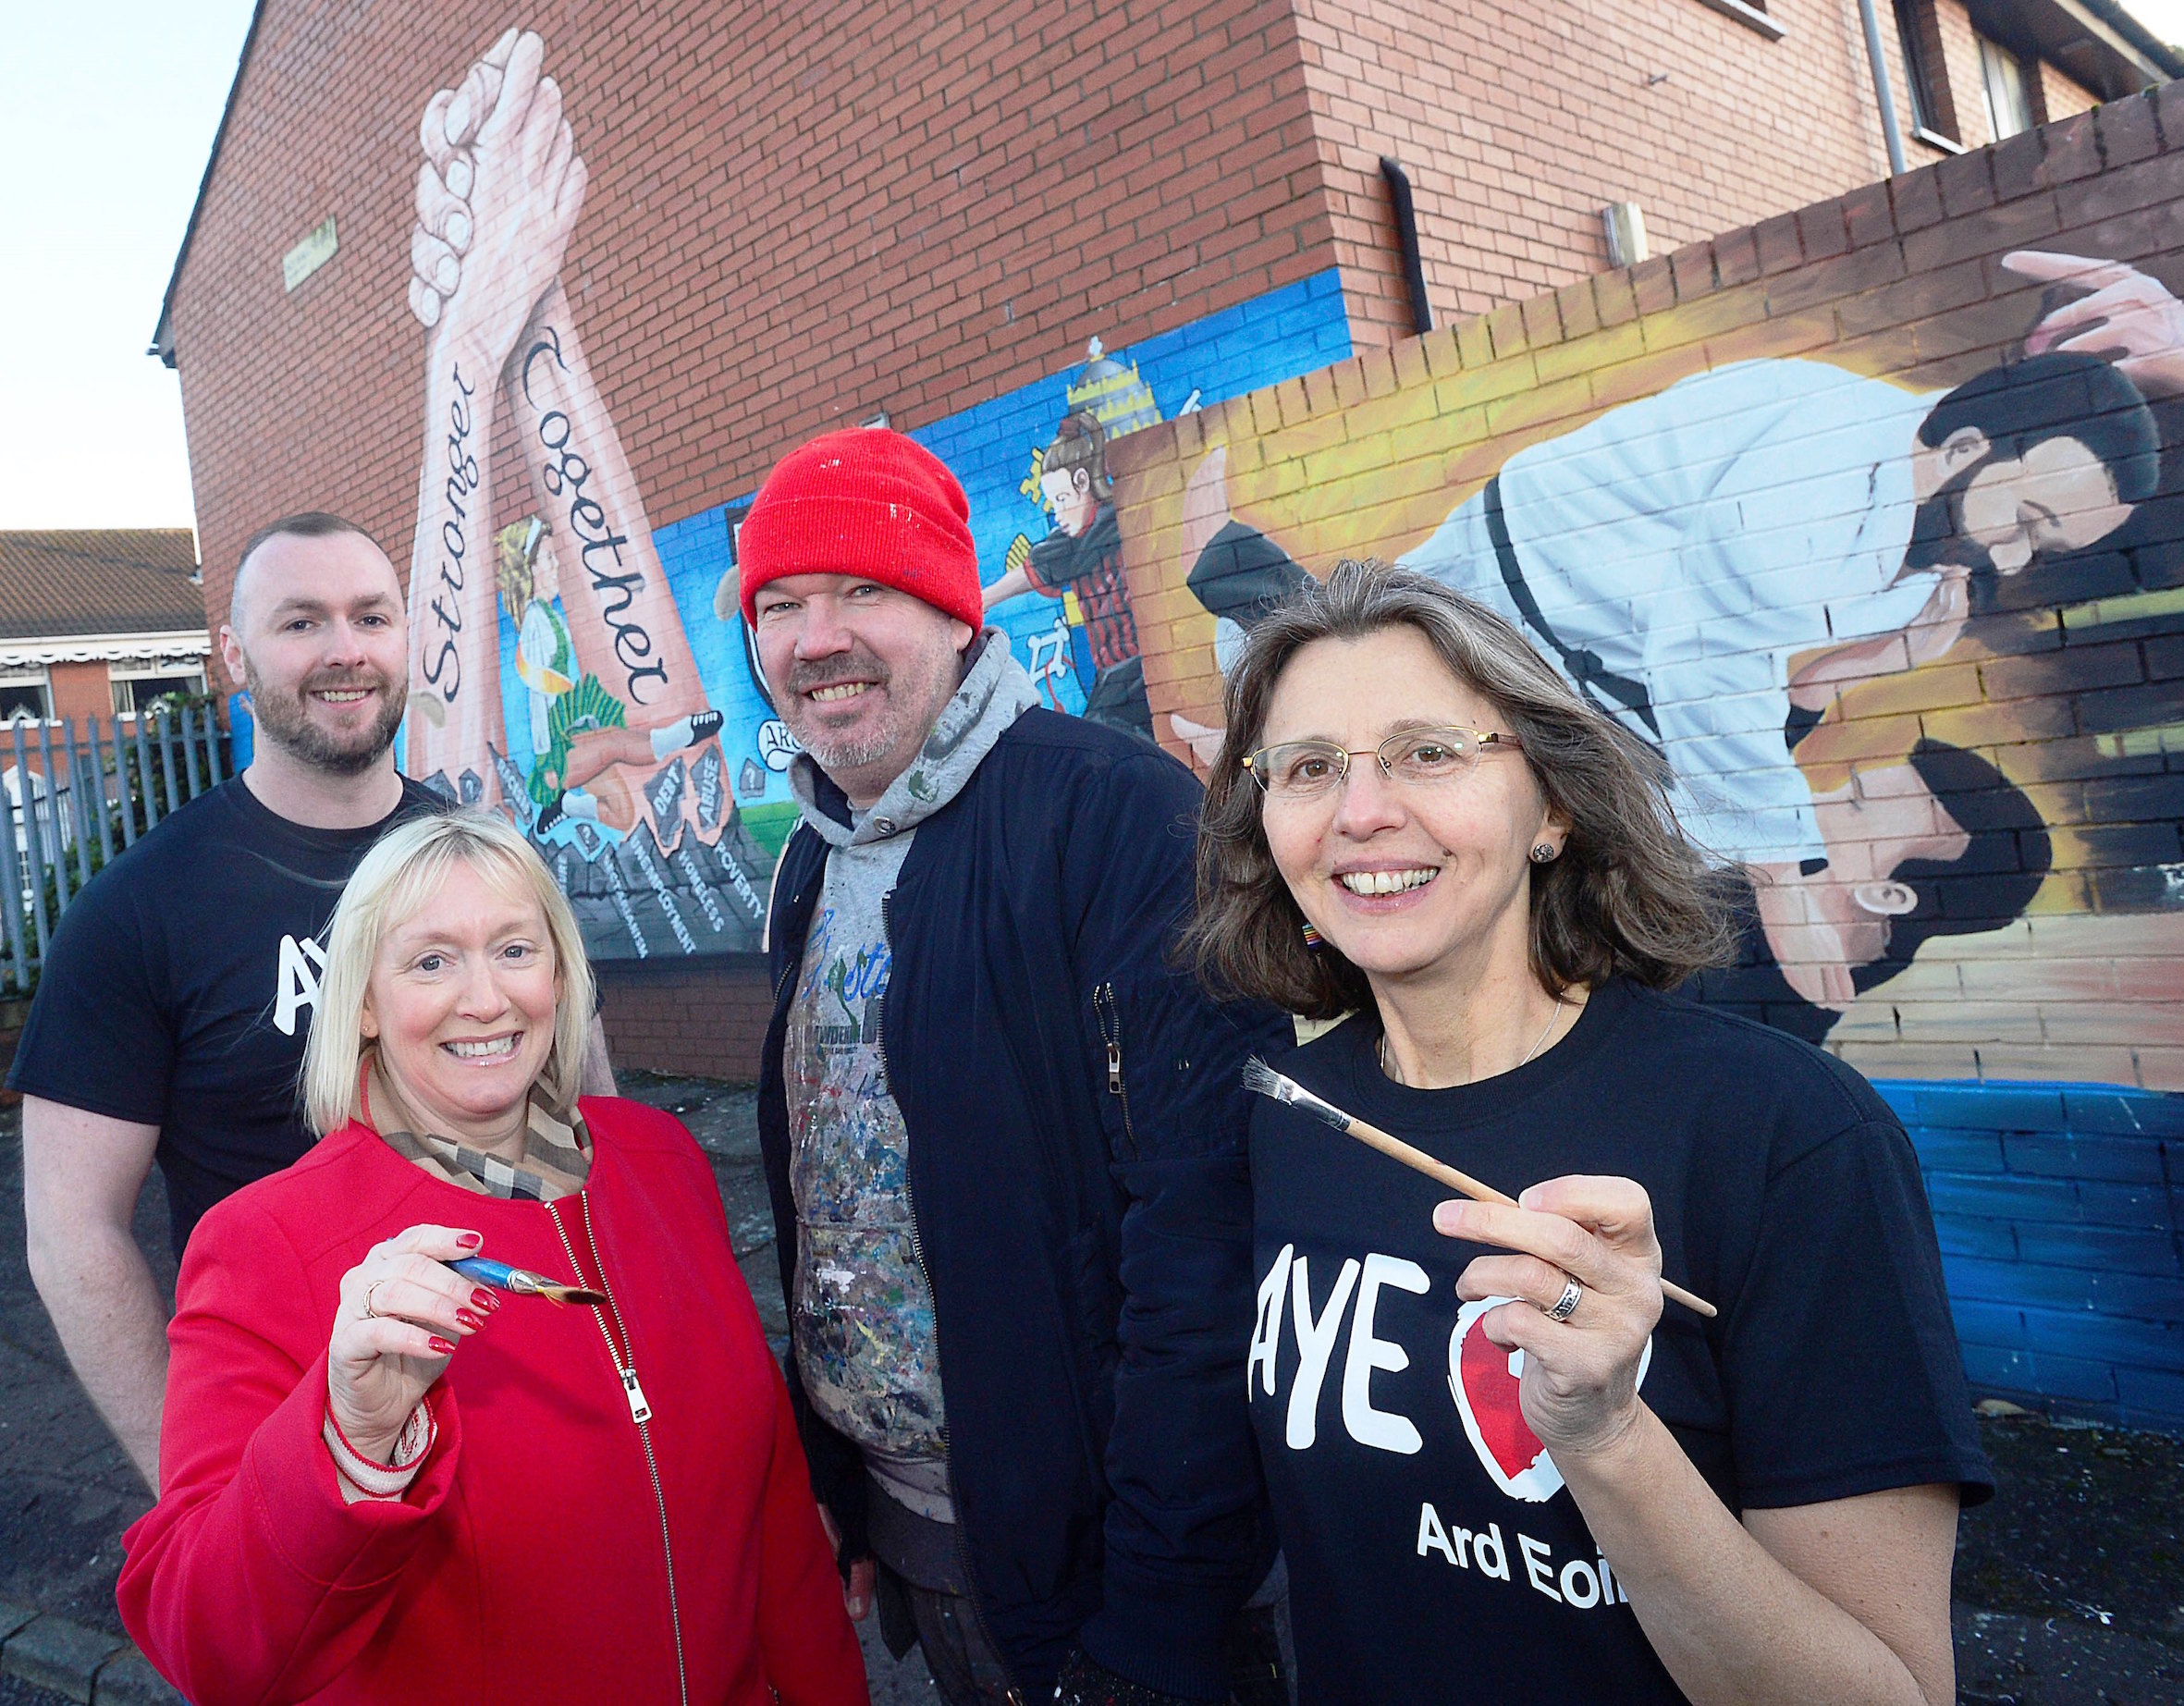 GREAT WORK: Seán Breen (Ardoyne Youth Enterprises Youth Engagement Officer), Amanda Ashe (Housing Executive Community Cohesion Officer), artist Michael Doherty and Catherine Couvert (Ardoyne Youth Enterprise Communications Officer) at the new mural in Havana Court in Ardoyne